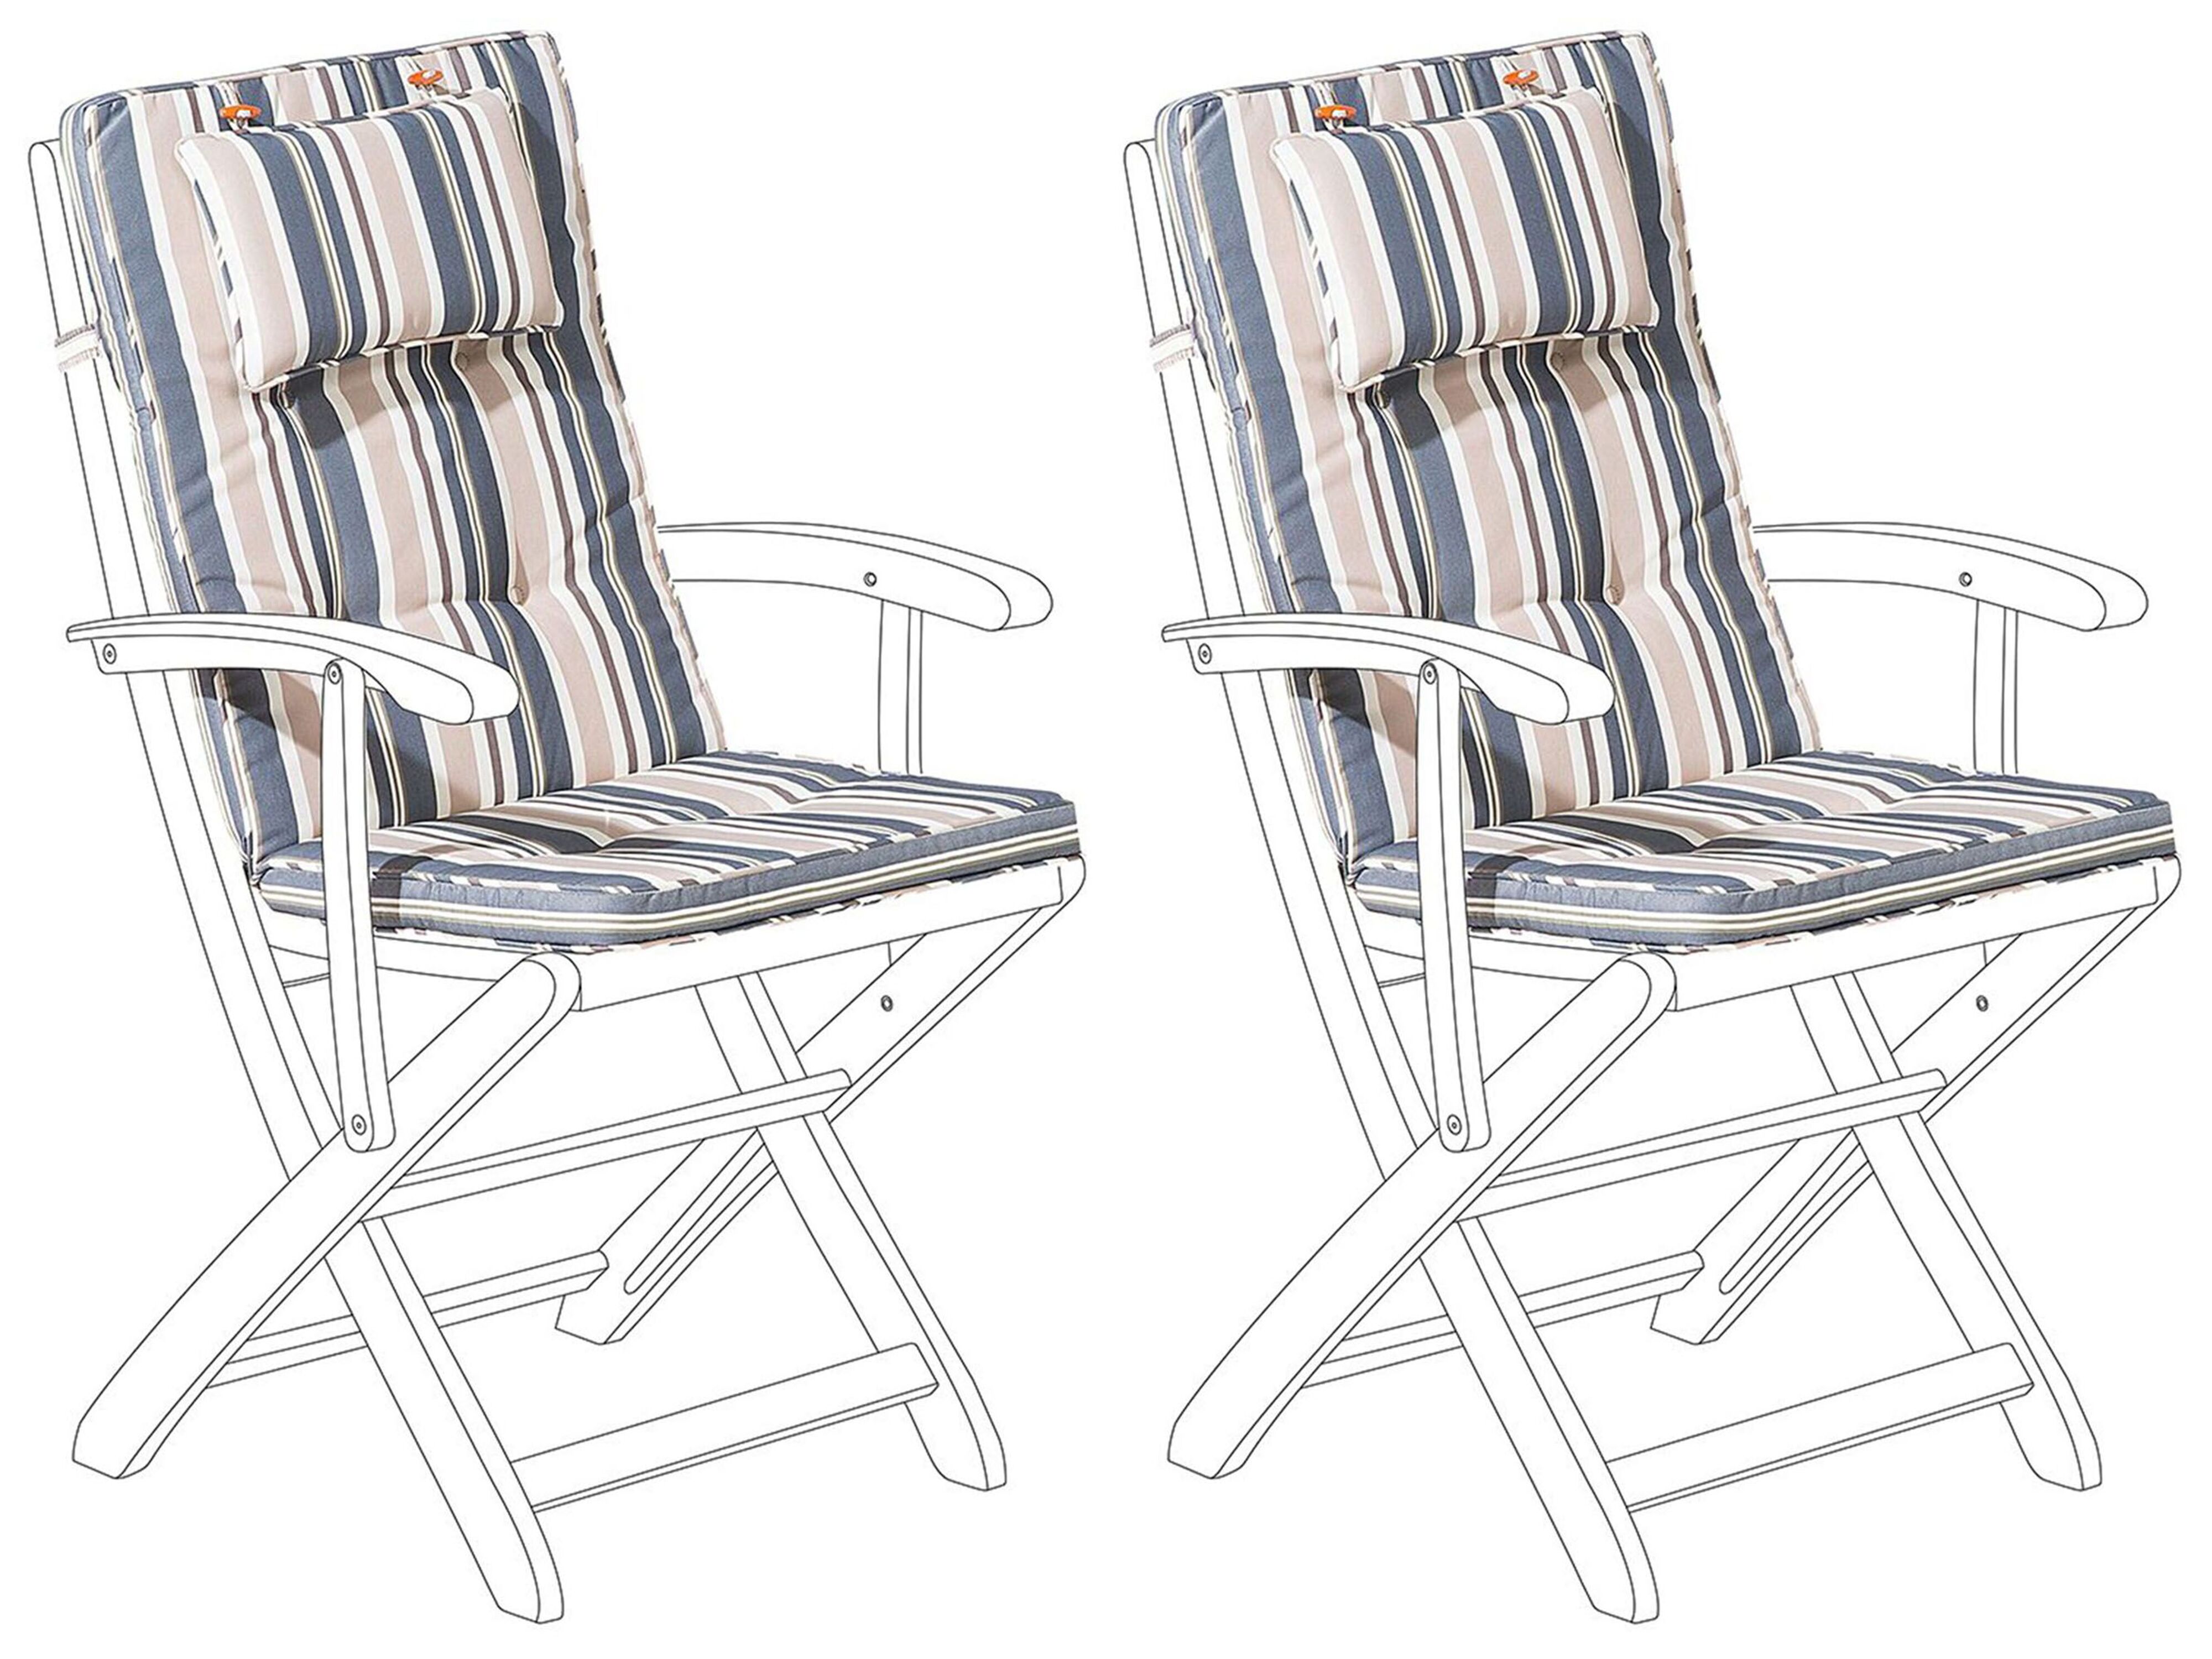 store Outdoor 70% Avandeo lamps MAUI Blue - 2 off Set of Cushions up to & | Seat/Back online Stripes Furniture, accessories